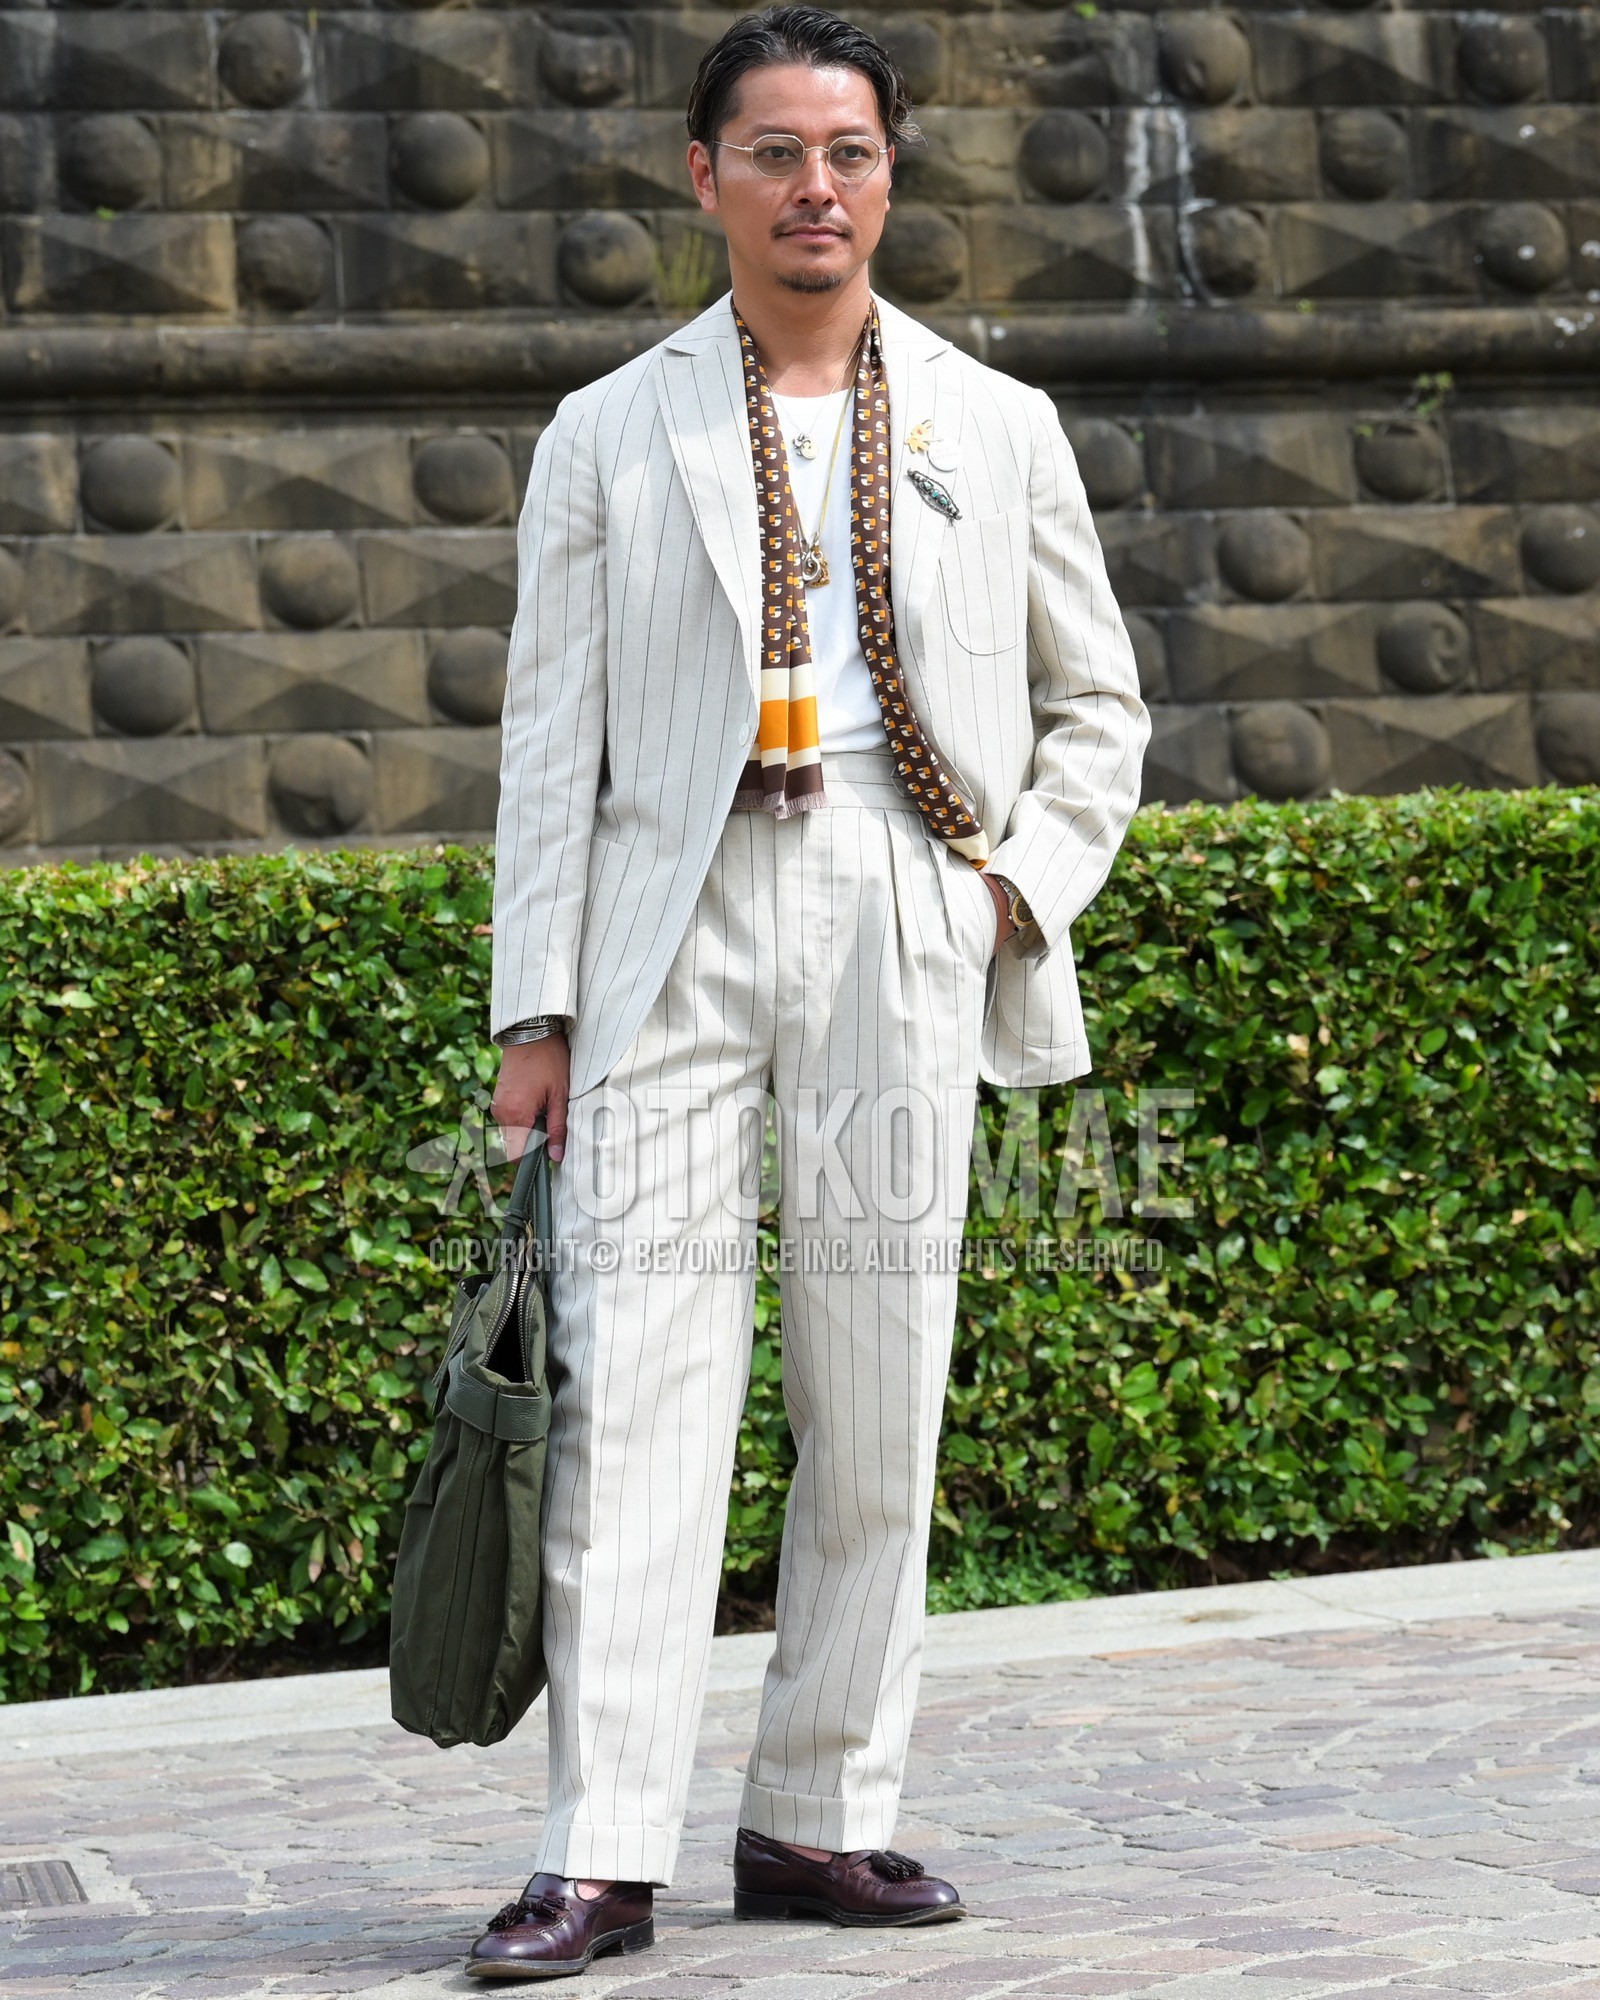 Men's spring summer autumn outfit with clear plain sunglasses, brown whole pattern scarf, white plain t-shirt, brown tassel loafers leather shoes, olive green plain briefcase/handbag, white stripes suit.